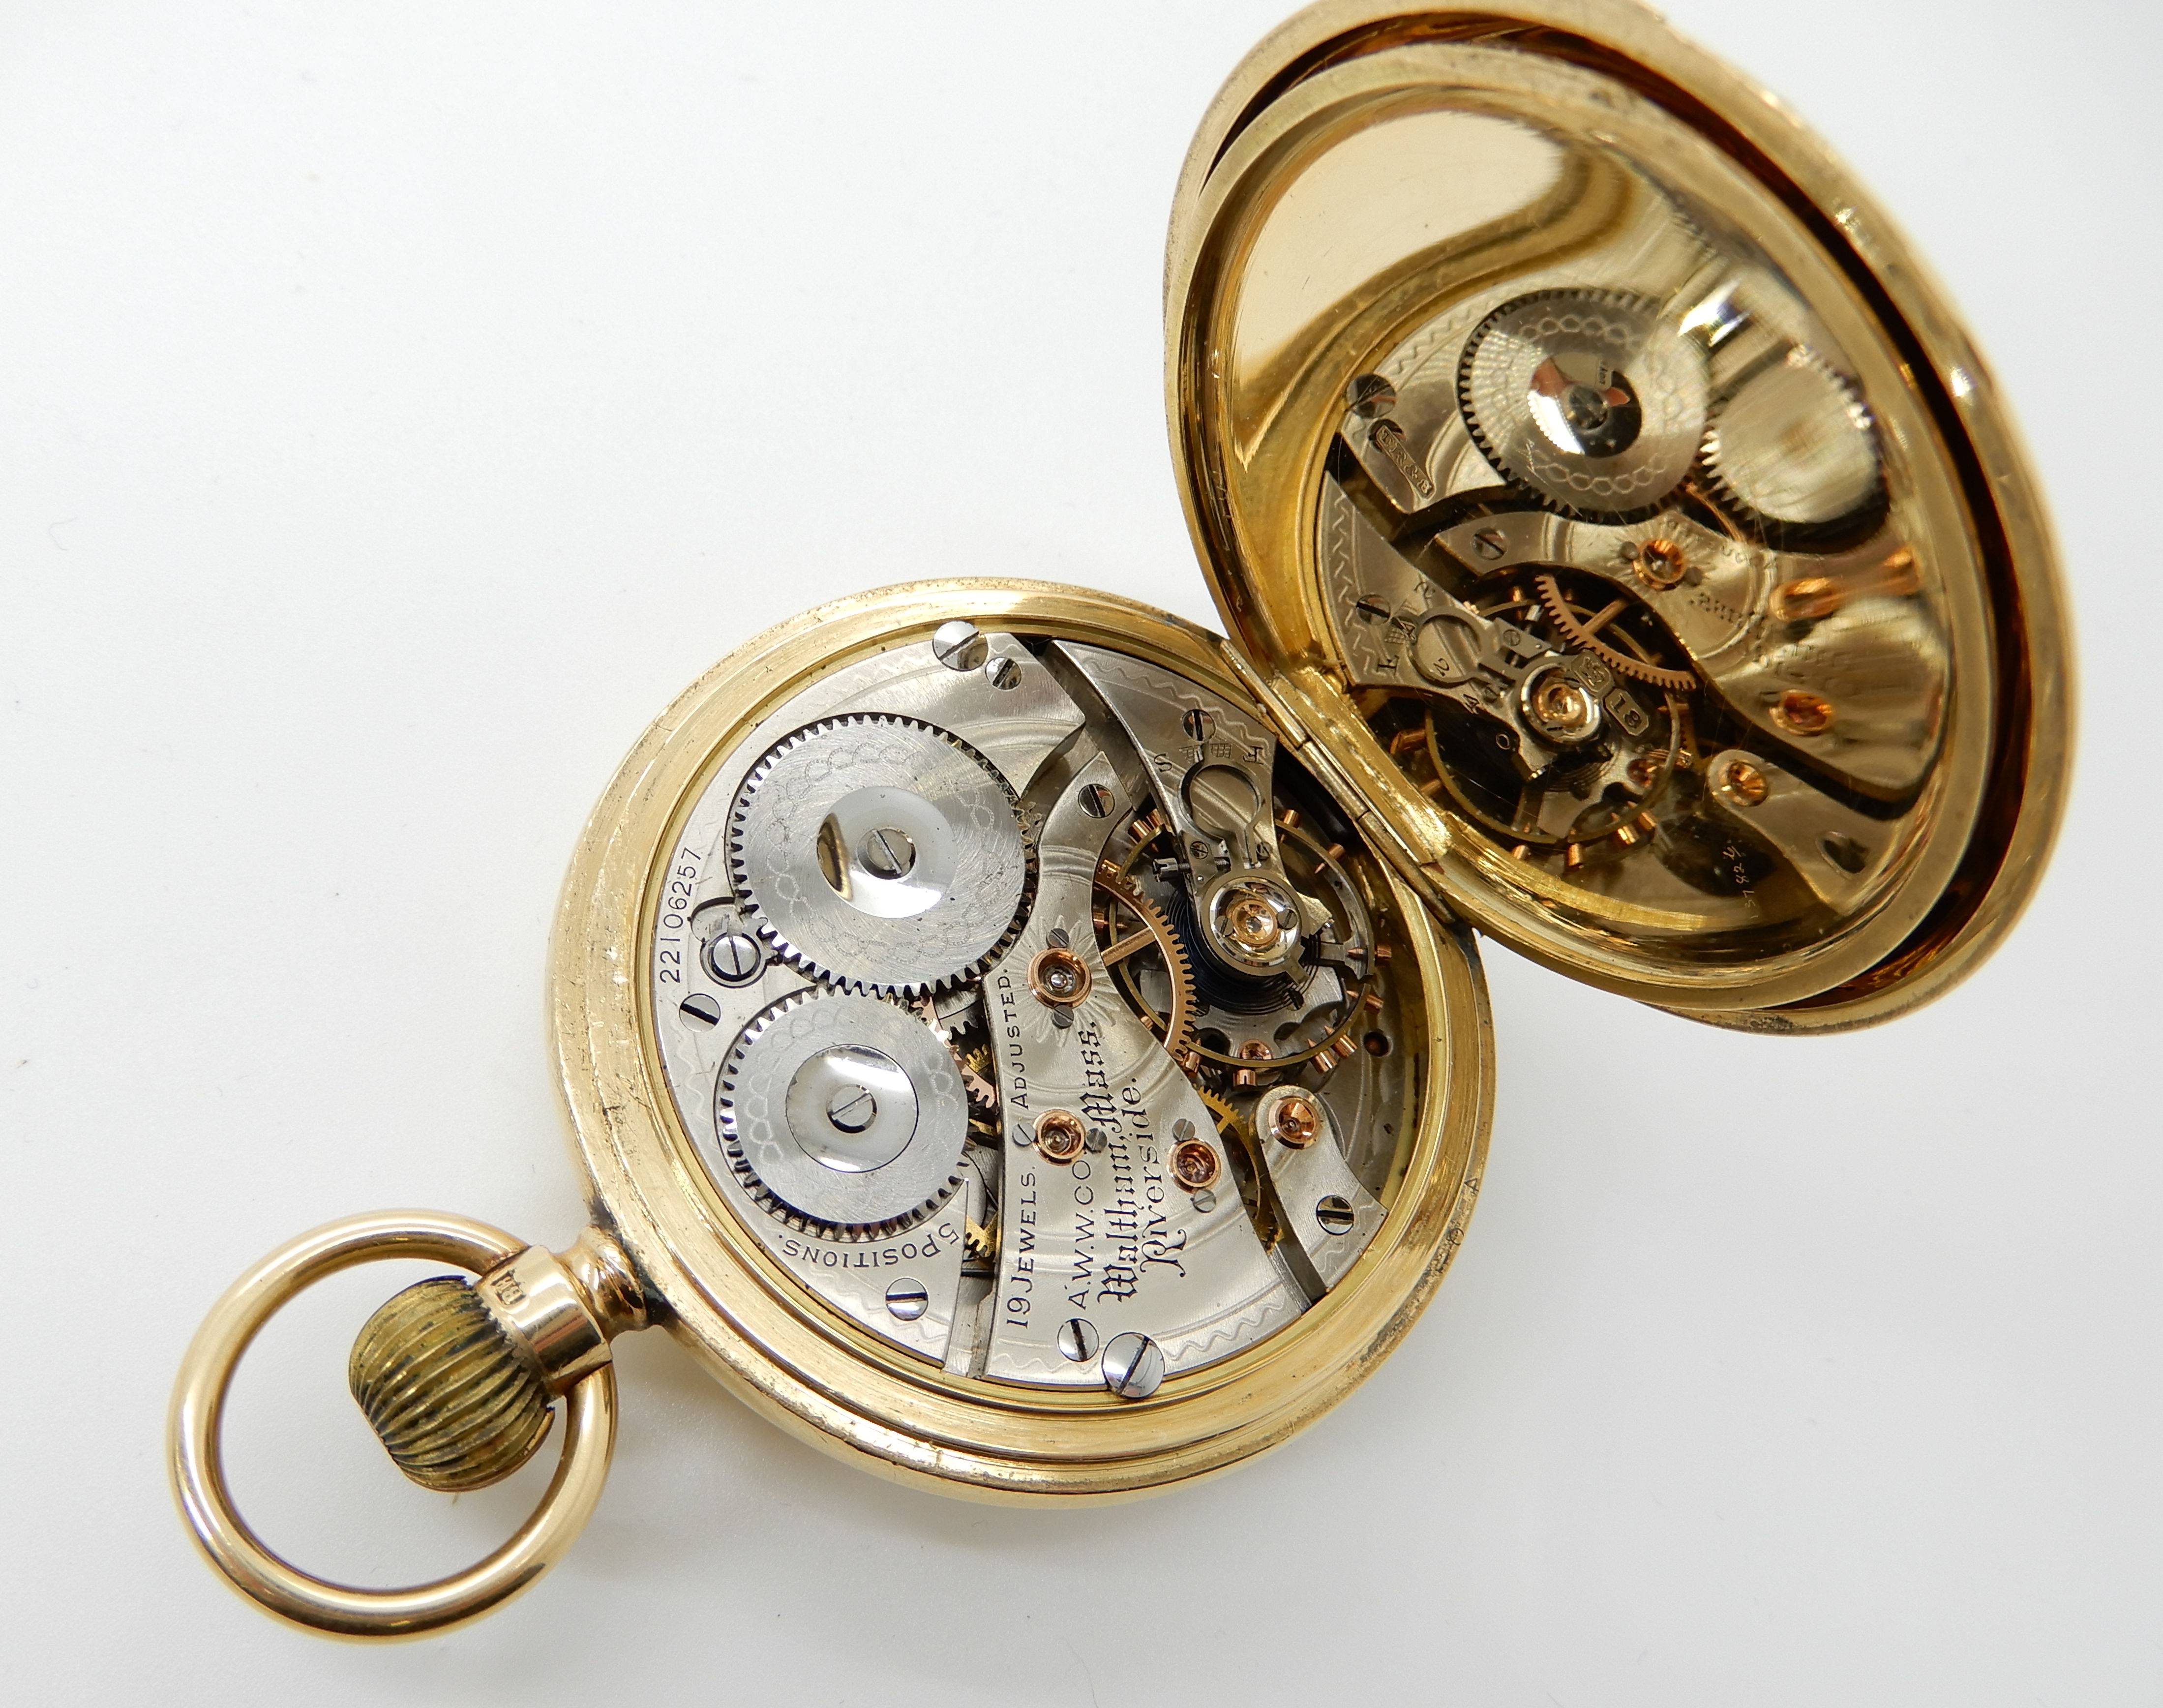 AN 18CT GOLD WALTHAM HALF HUNTER POCKET WATCH with white enamel dial, black Roman numerals, - Image 5 of 6